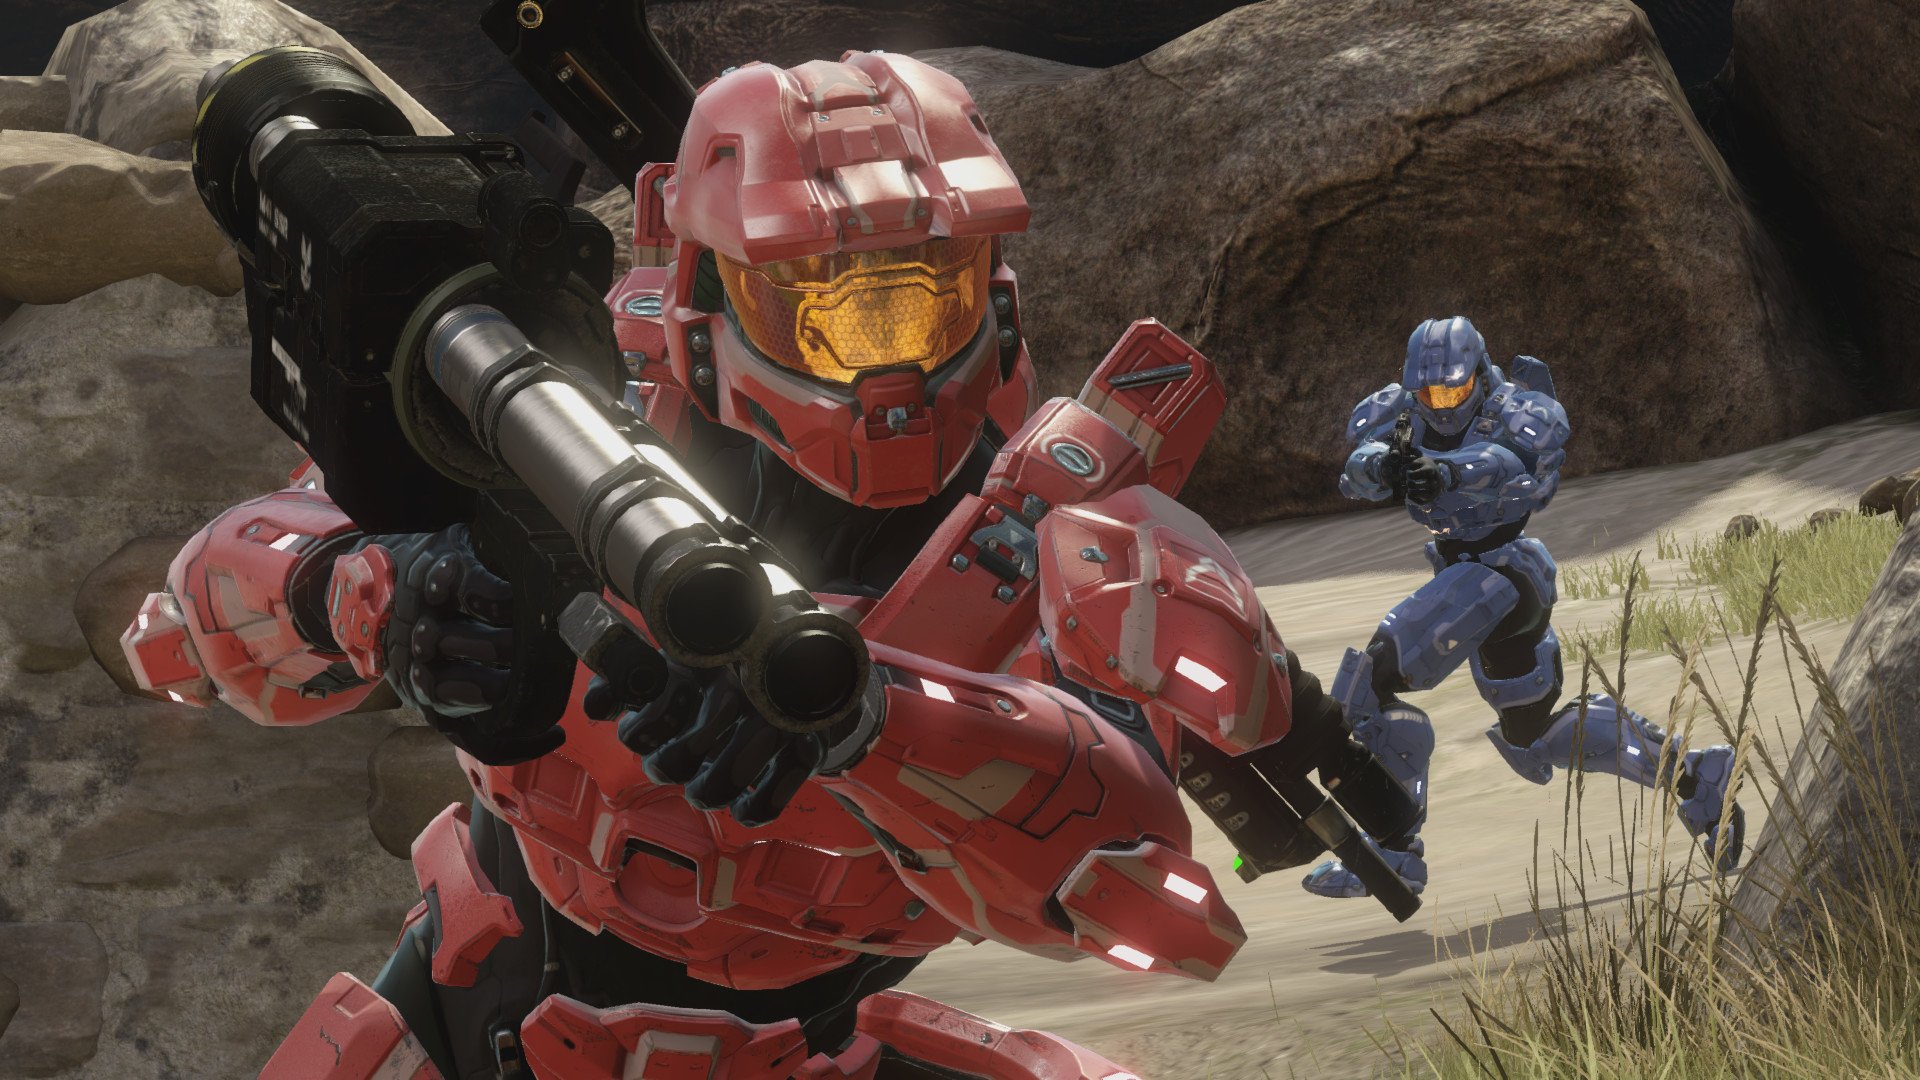 Update on Halo: MCC  Halo - Official Site (en)